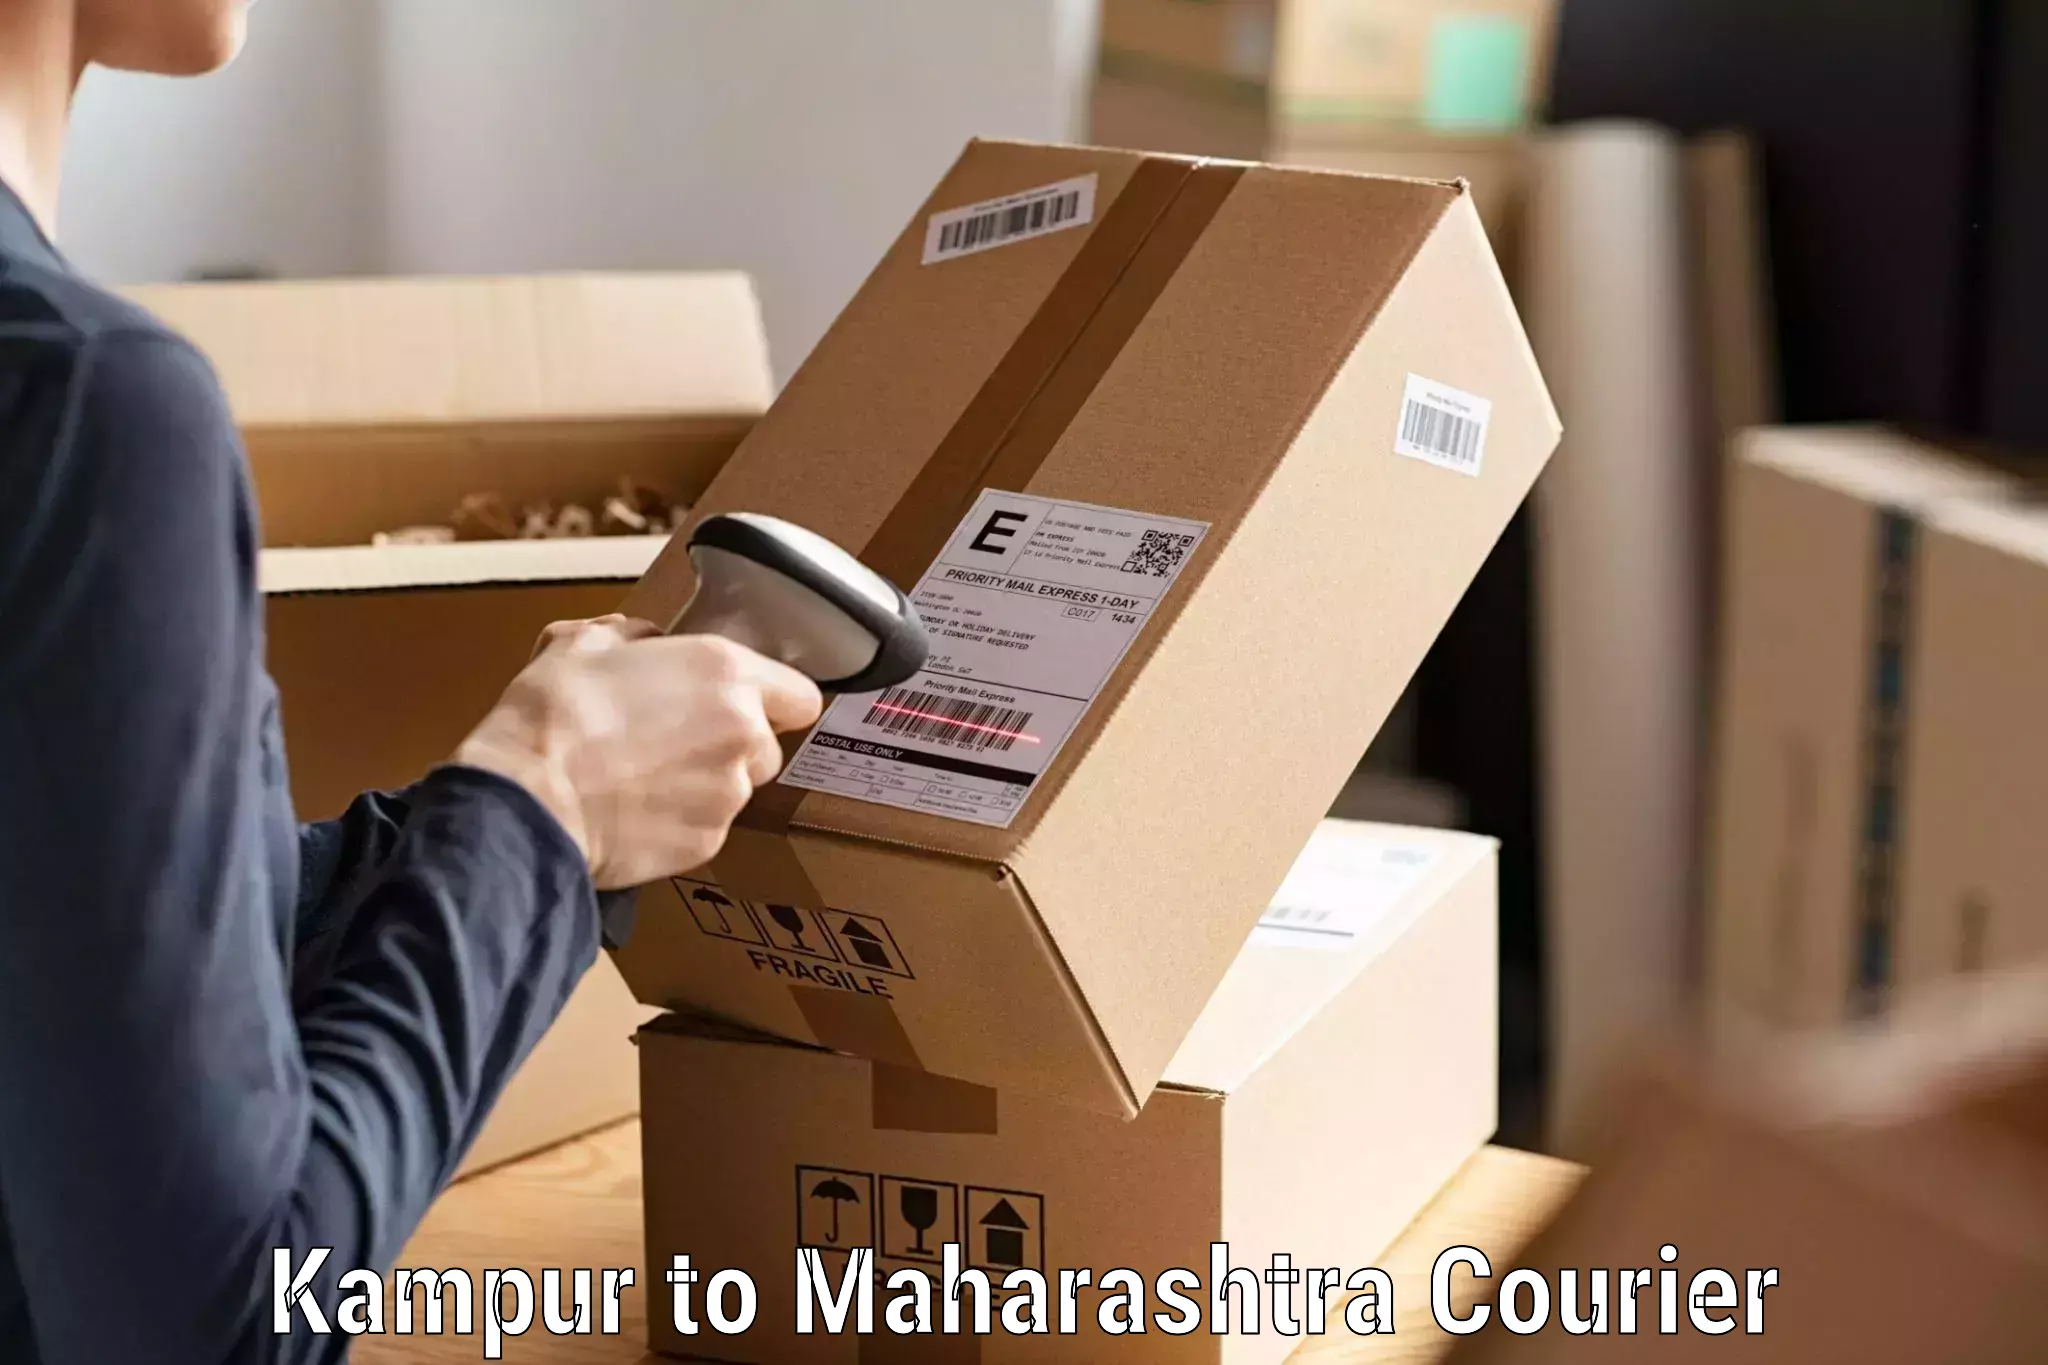 Reliable shipping partners Kampur to IIIT Pune